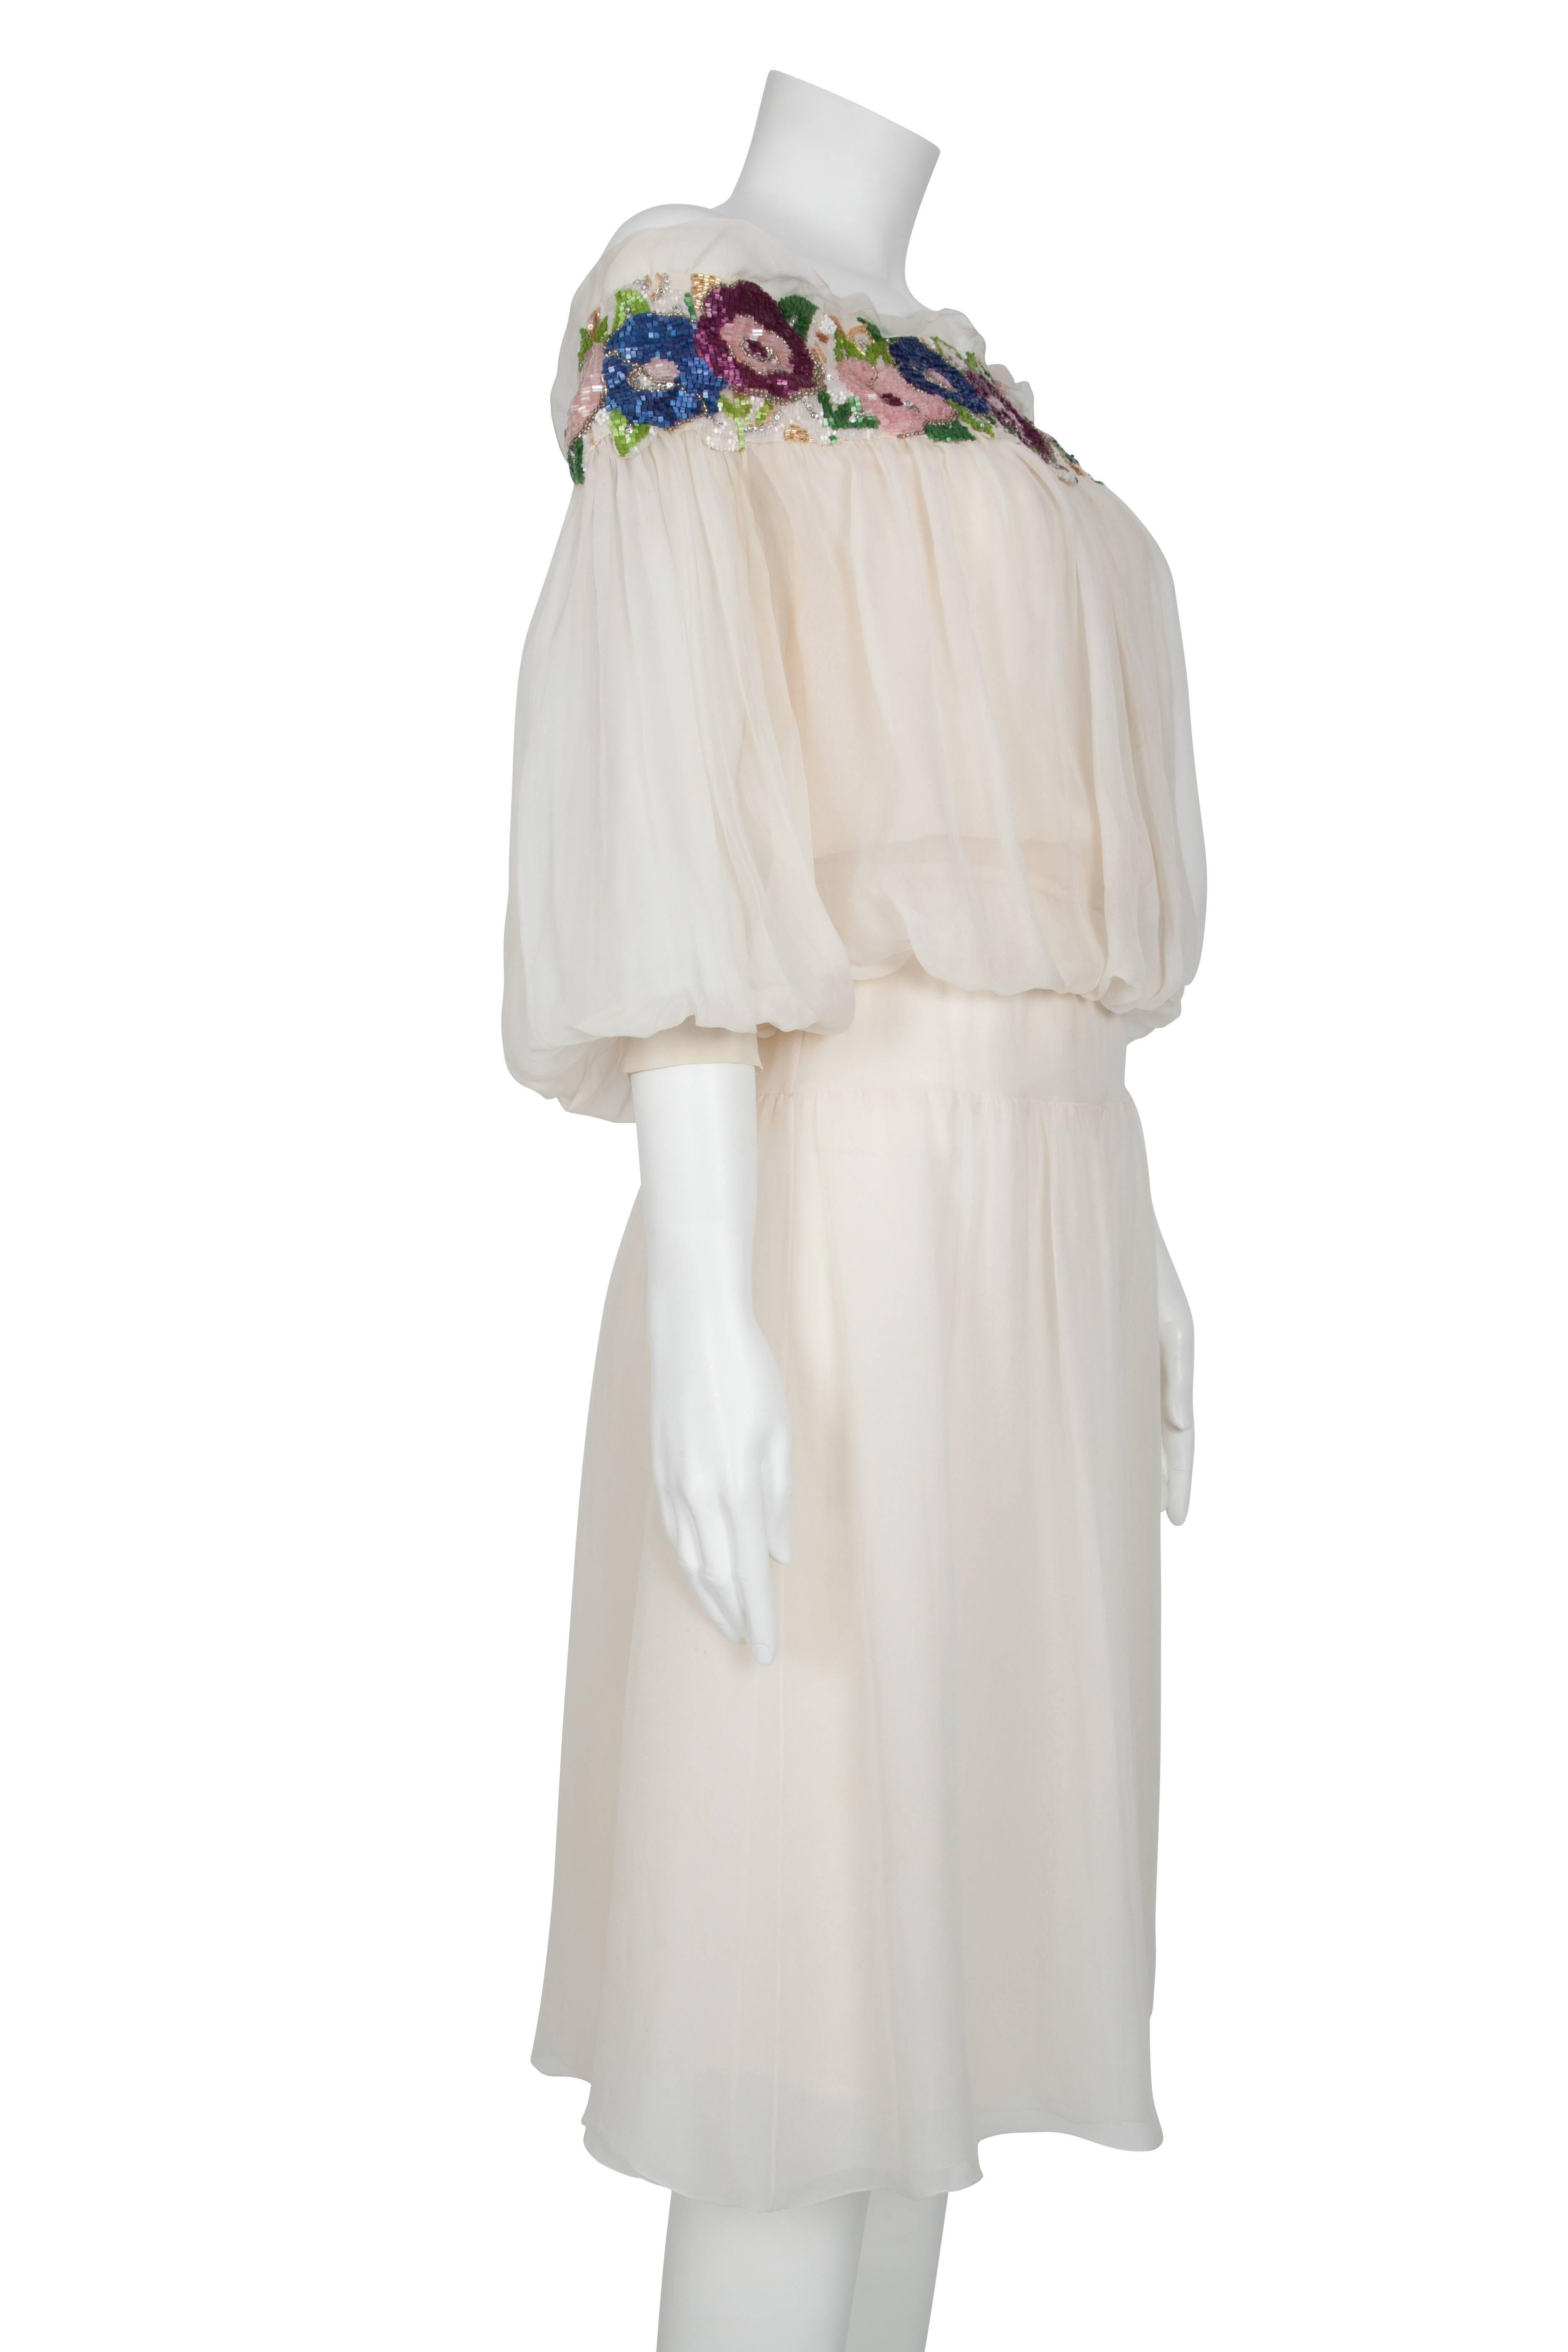 1980's Christian Dior Ivory Chiffon Dress with Floral Beaded Collar In Excellent Condition For Sale In London, GB